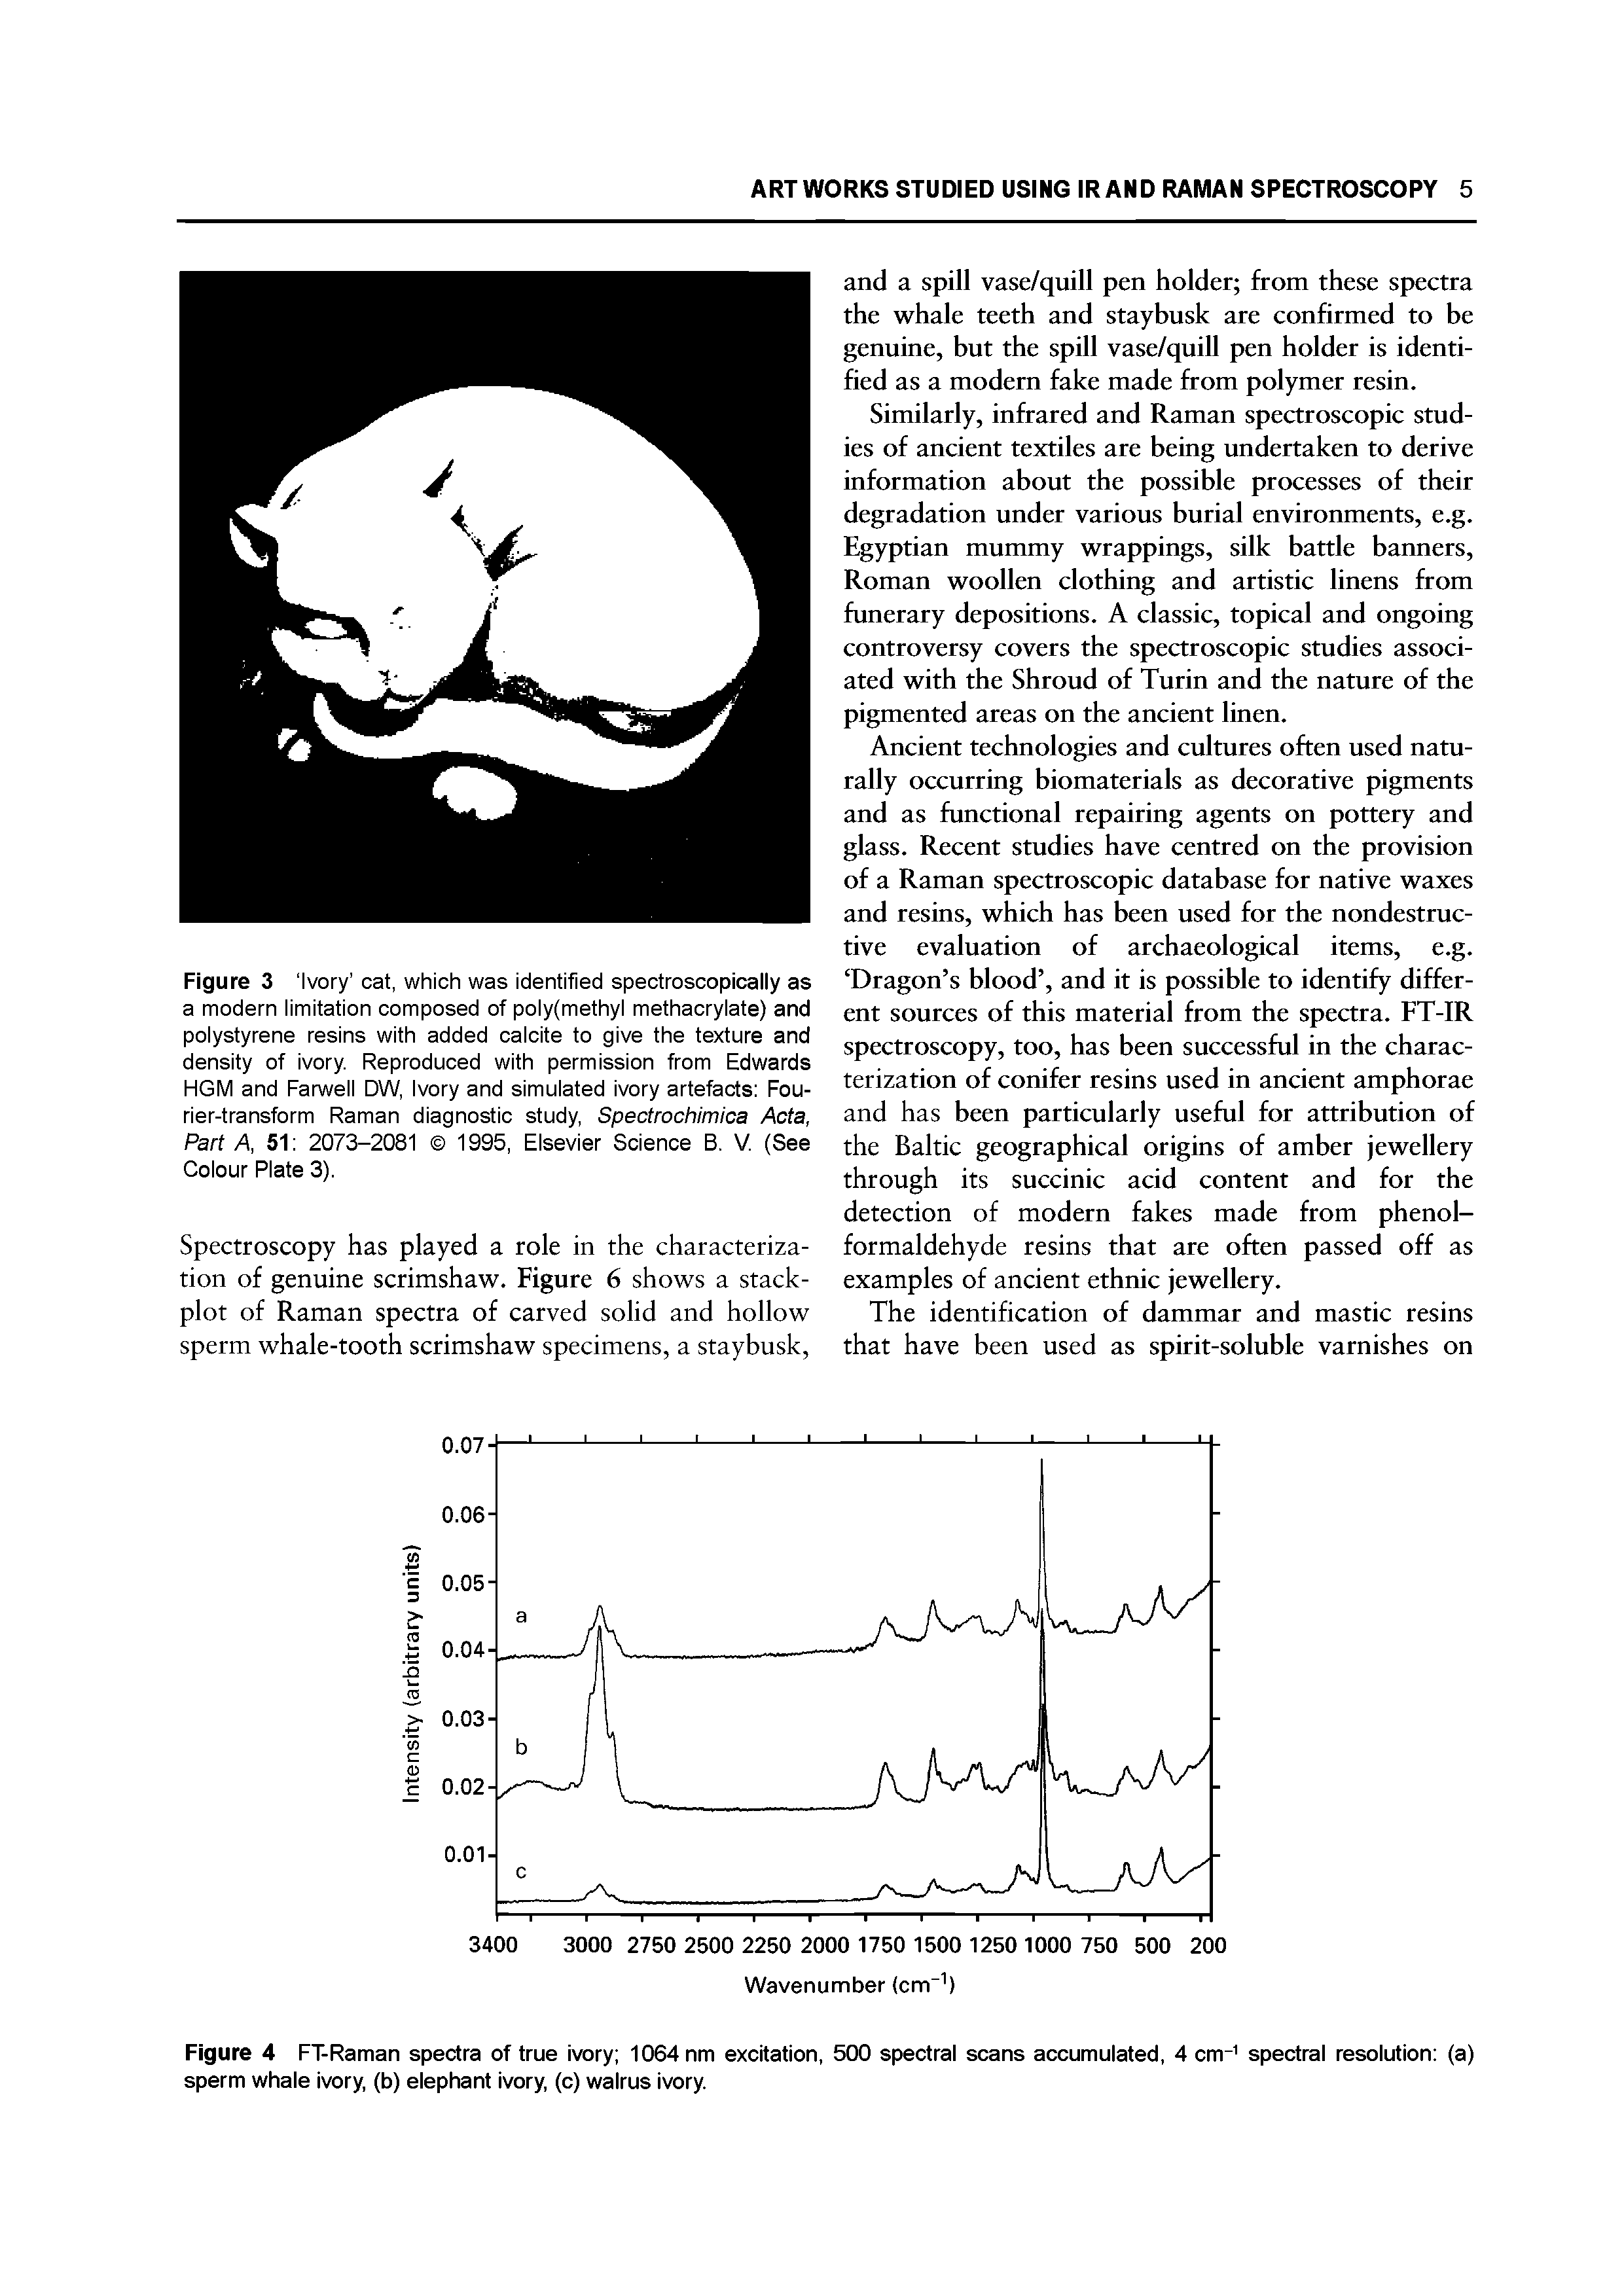 Figure 3 Ivory cat, which was identified spectroscopically as a modern limitation composed of poly(methyl methacrylate) and polystyrene resins with added calcite to give the texture and density of ivory. Reproduced with permission from Edwards HGM and Farwell DW, Ivory and simulated ivory arte cts Fou-rier-transform Raman diagnostic study, Spectrochimica Acta, Part A, 51 2073-2081 1995, Elsevier Science B. V. (See Colour Plate 3).